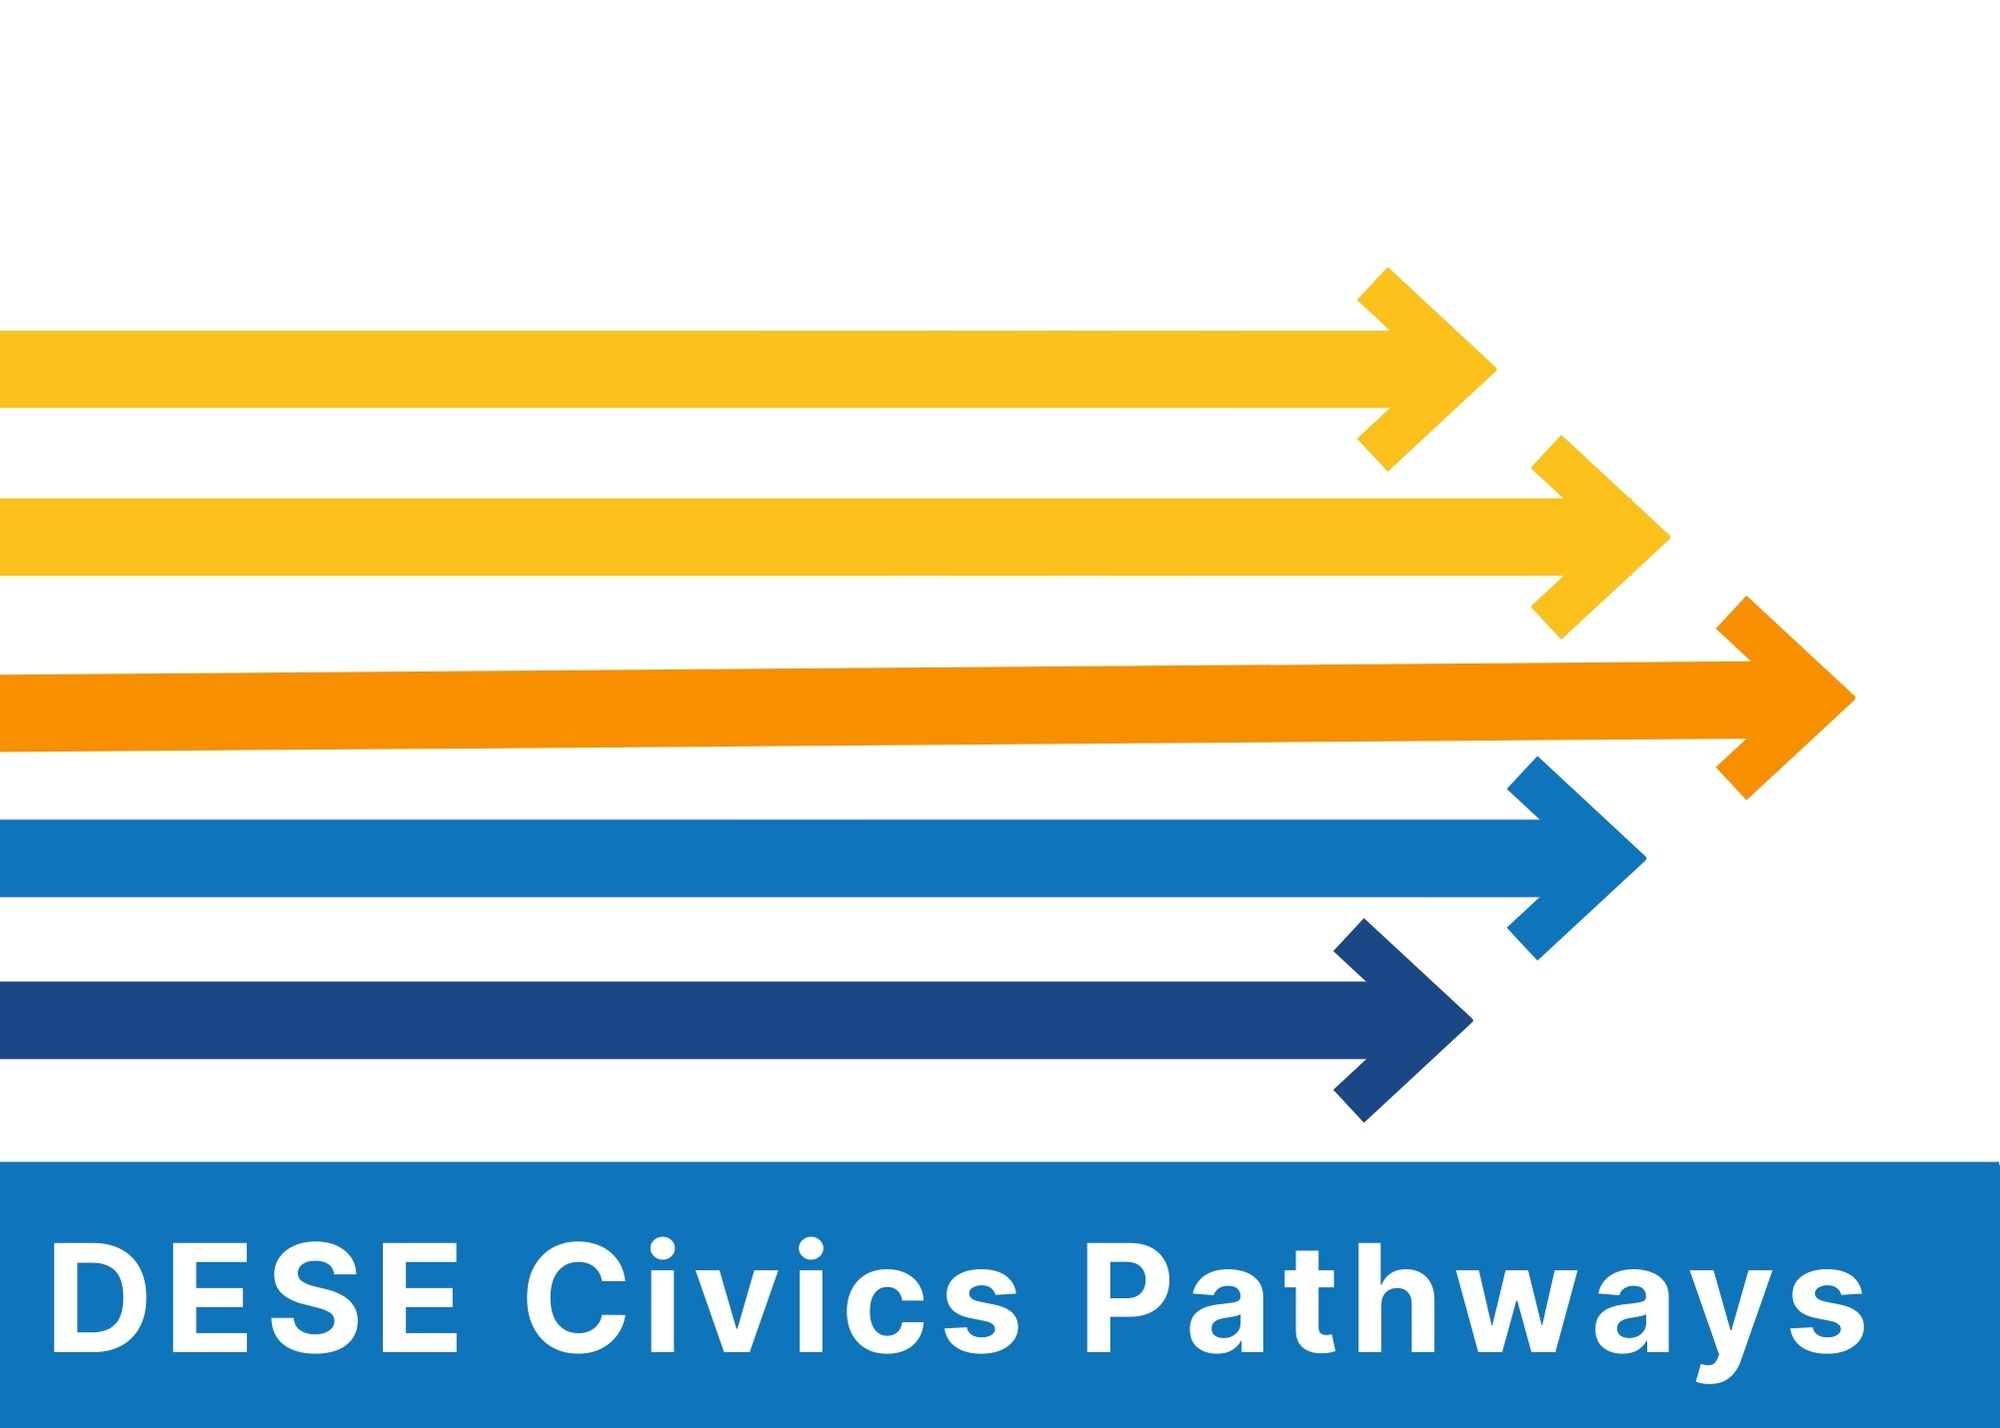 DESE Civics Pathways logo with stacked arrows together pointing forward